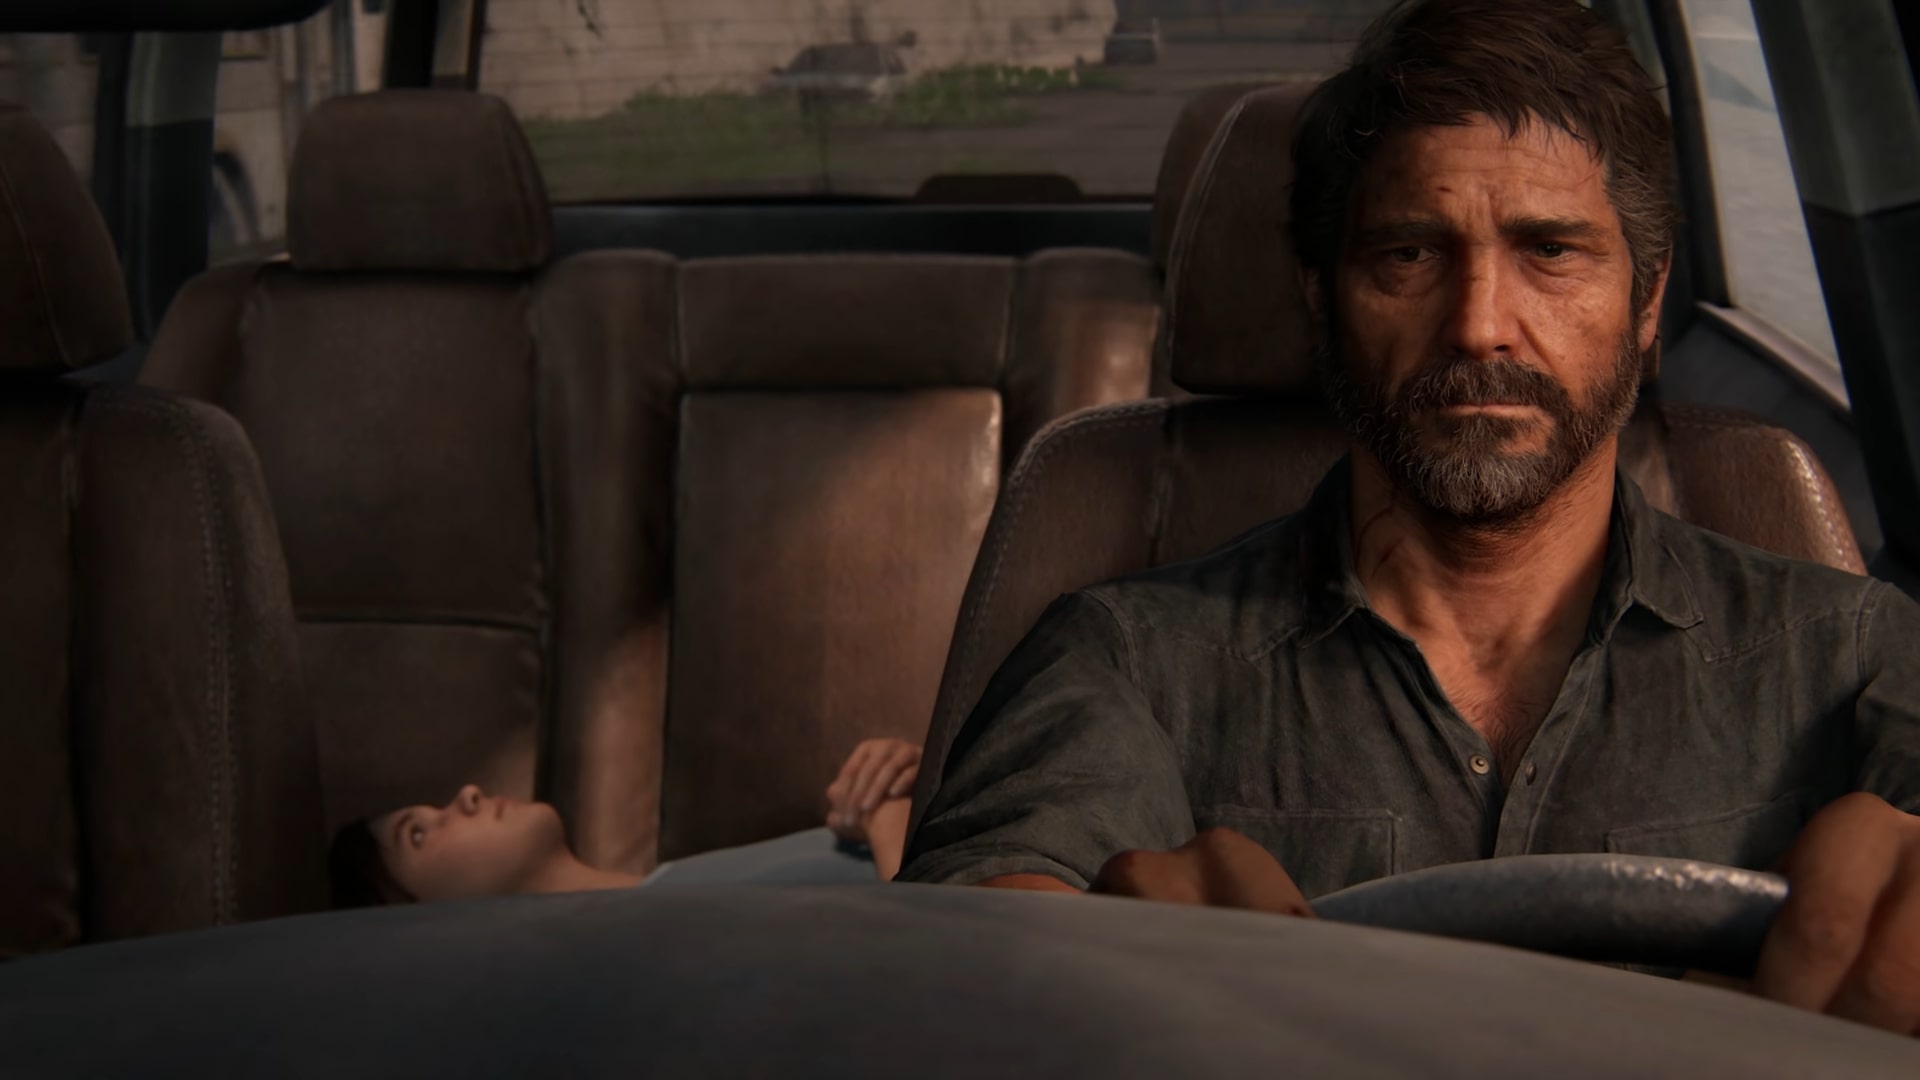 The Last of Us Episode 2 Almost Had a MUCH Darker Opening Scene